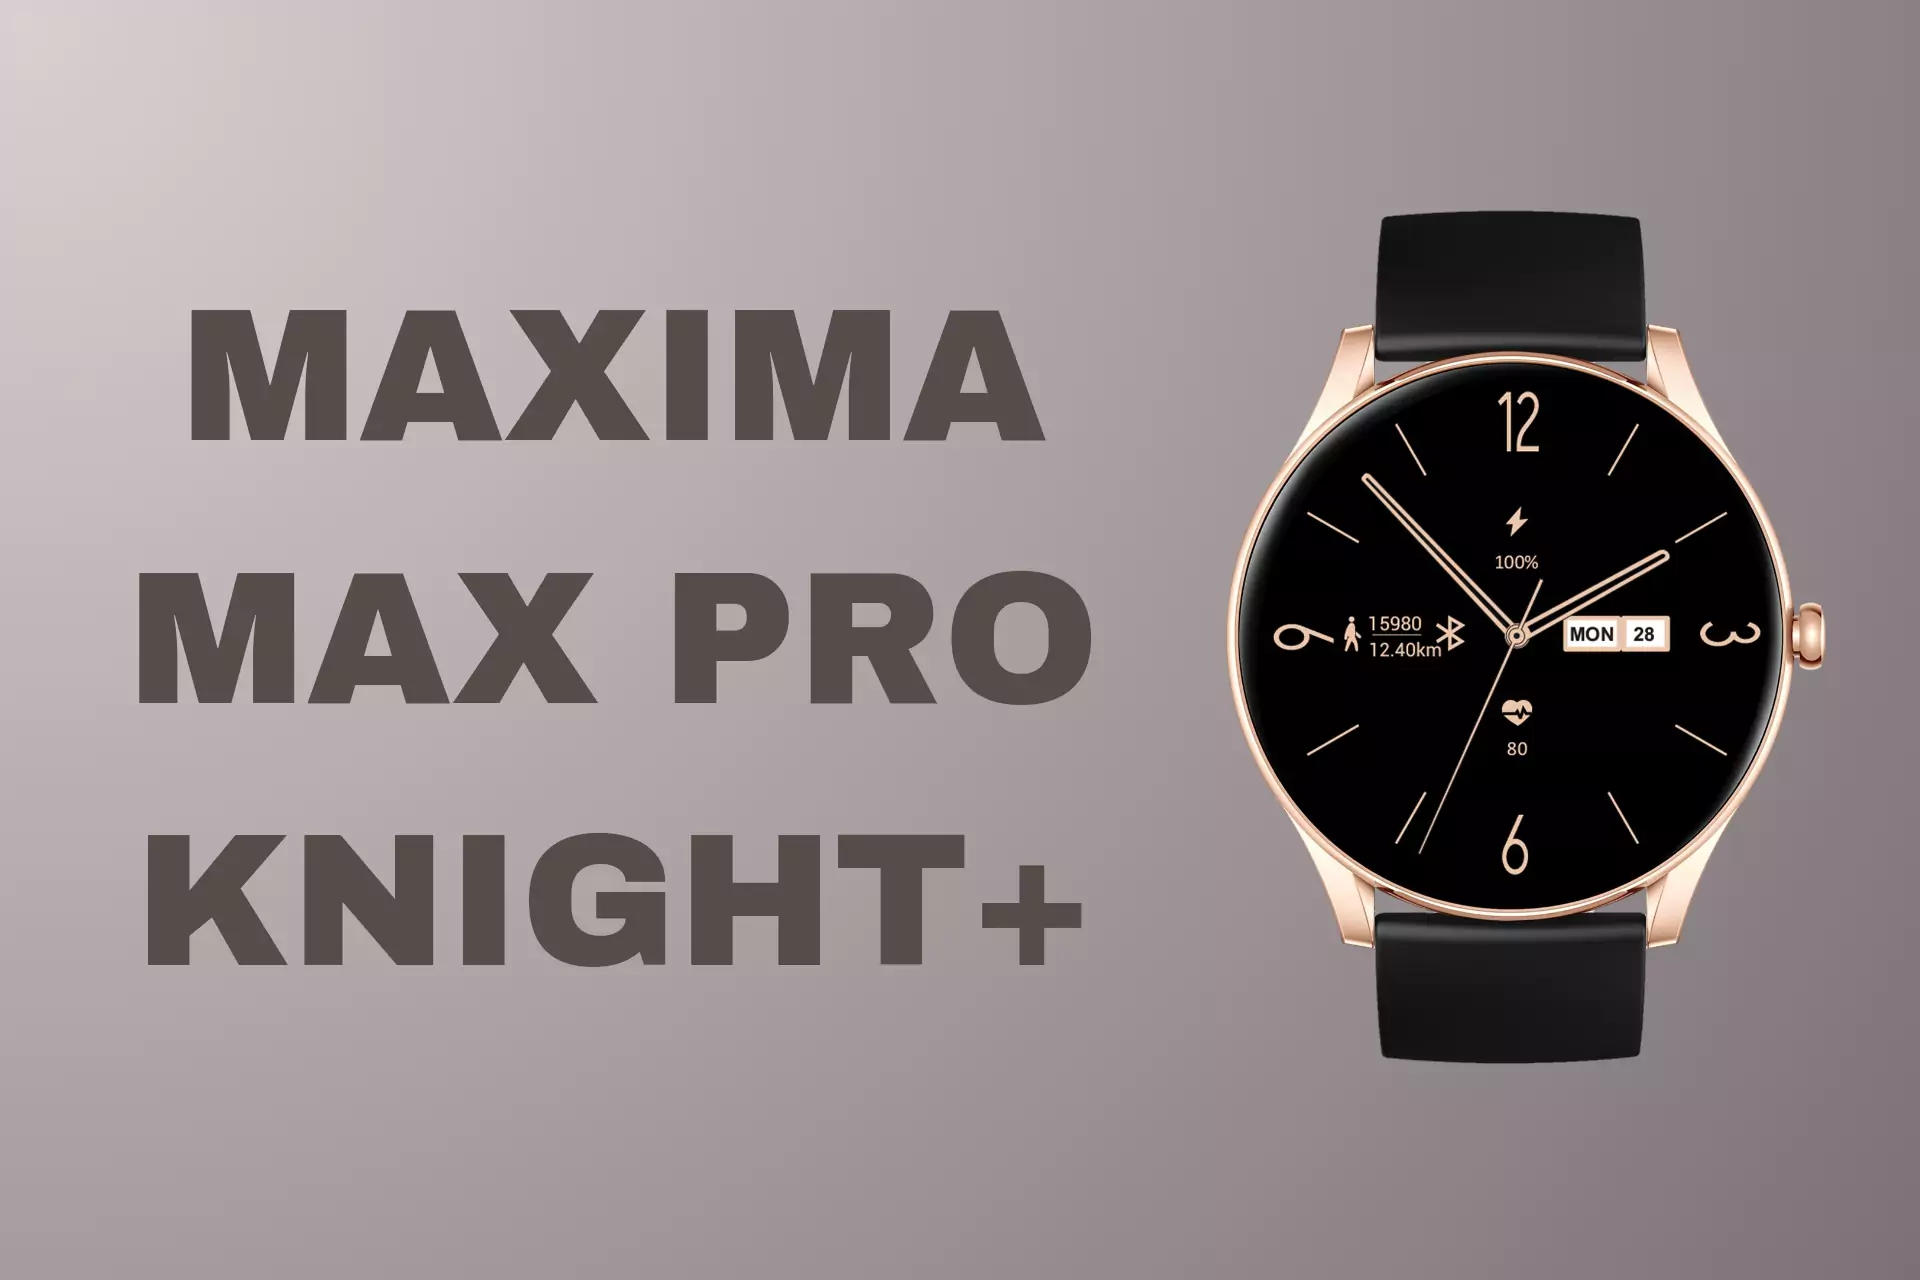 You are currently viewing Maxima Max Pro Knight+: The Latest Smartwatch with 1.39” Ultra HD display And Bluetooth Calling – At Rs 1,999